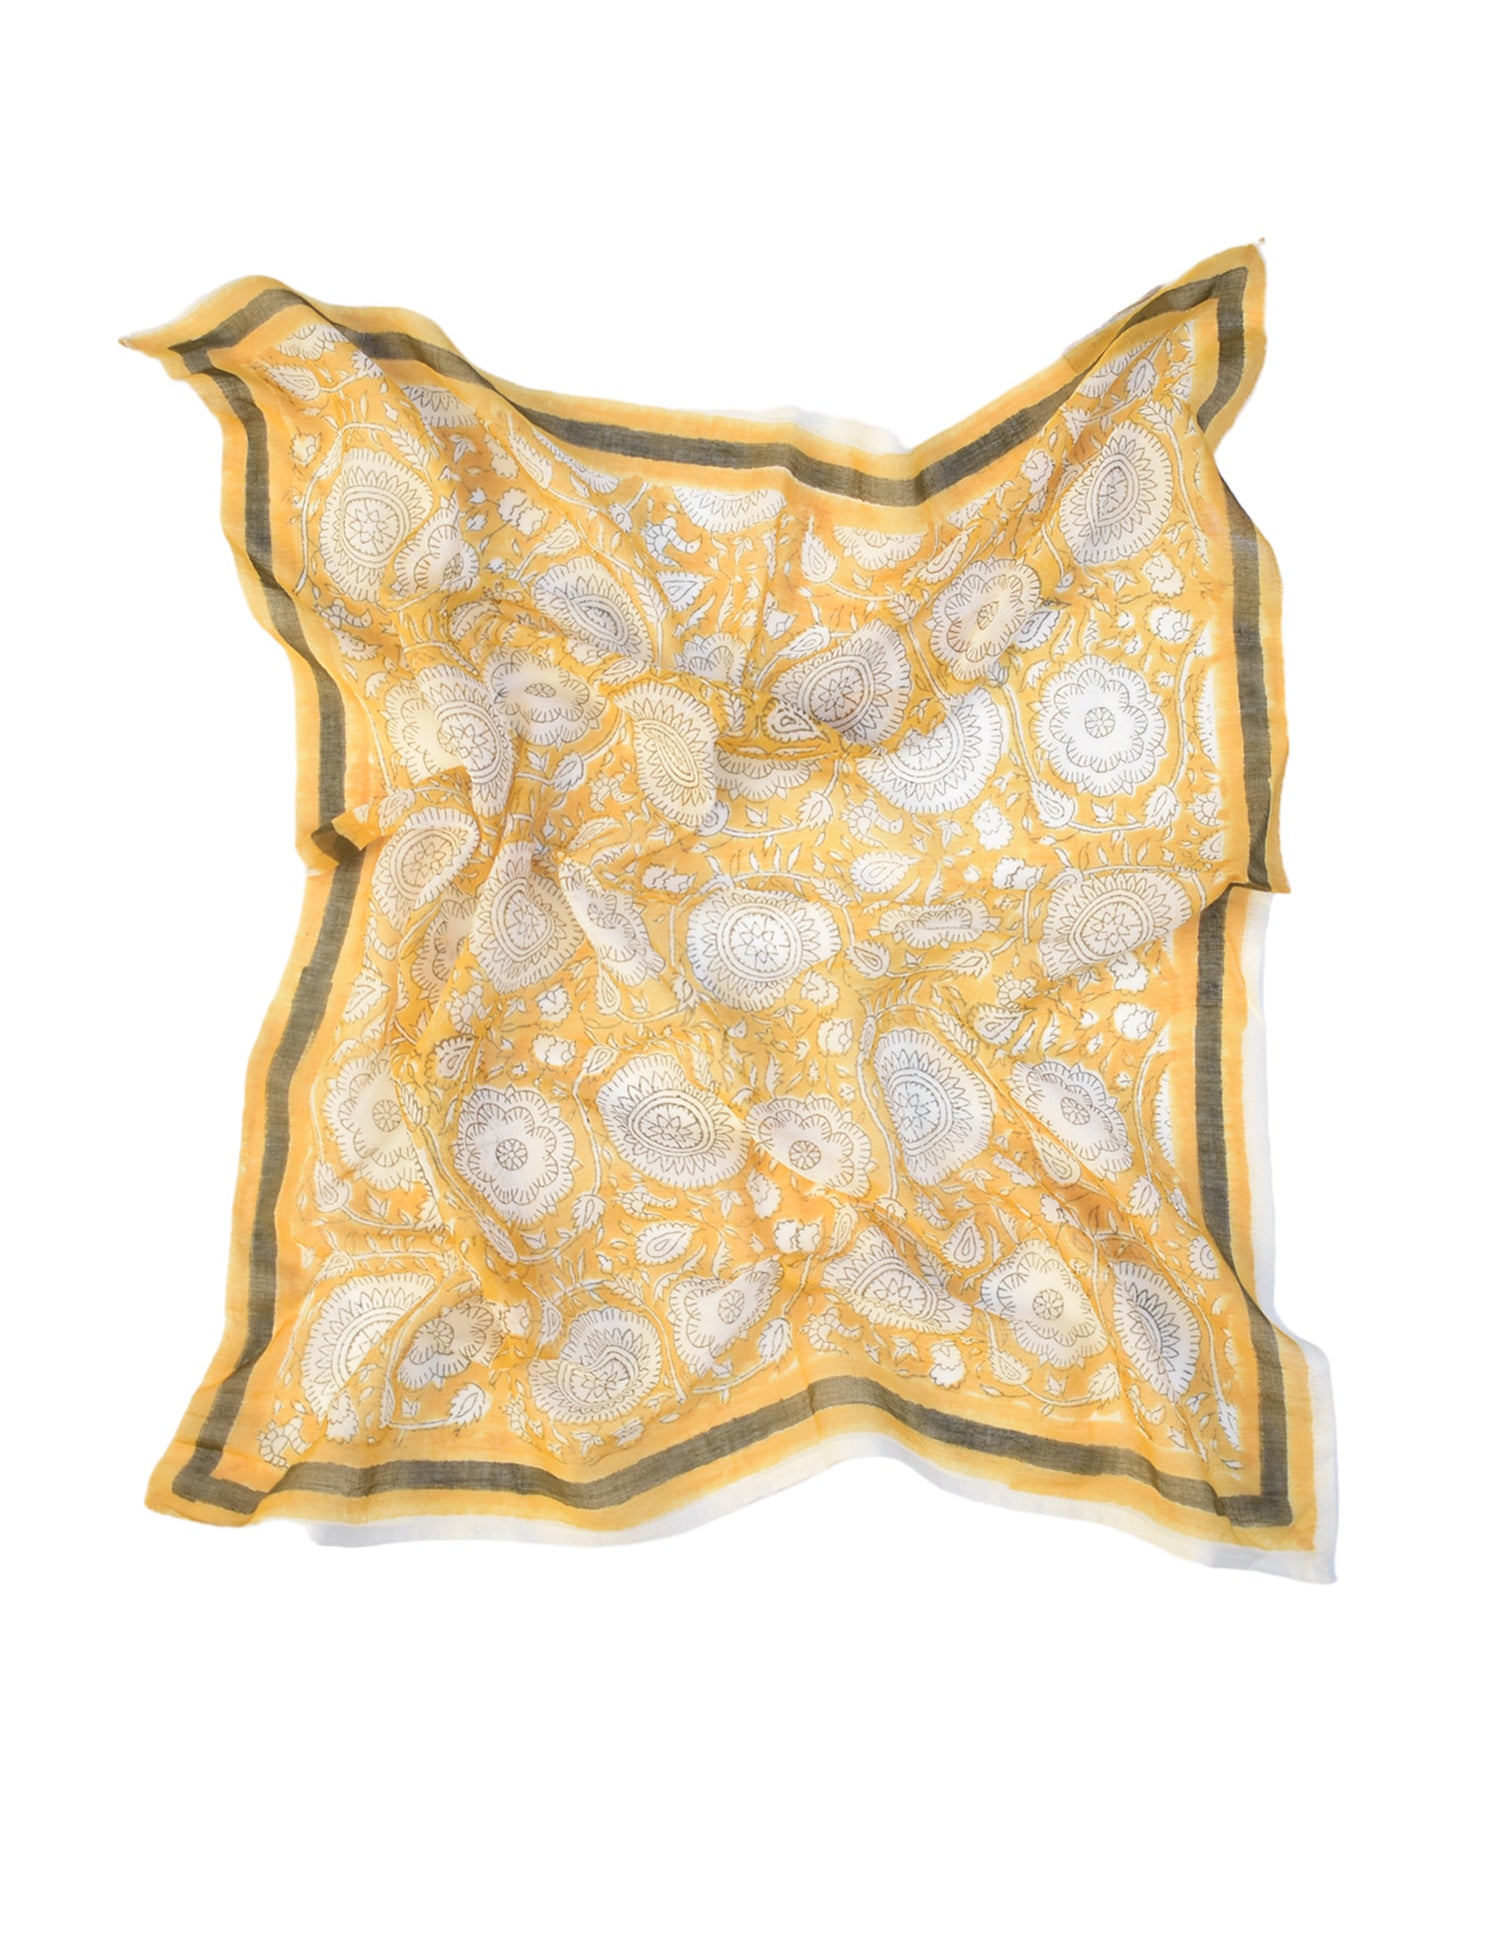 Tate yellow block printed floral bandana laid flat against a white background